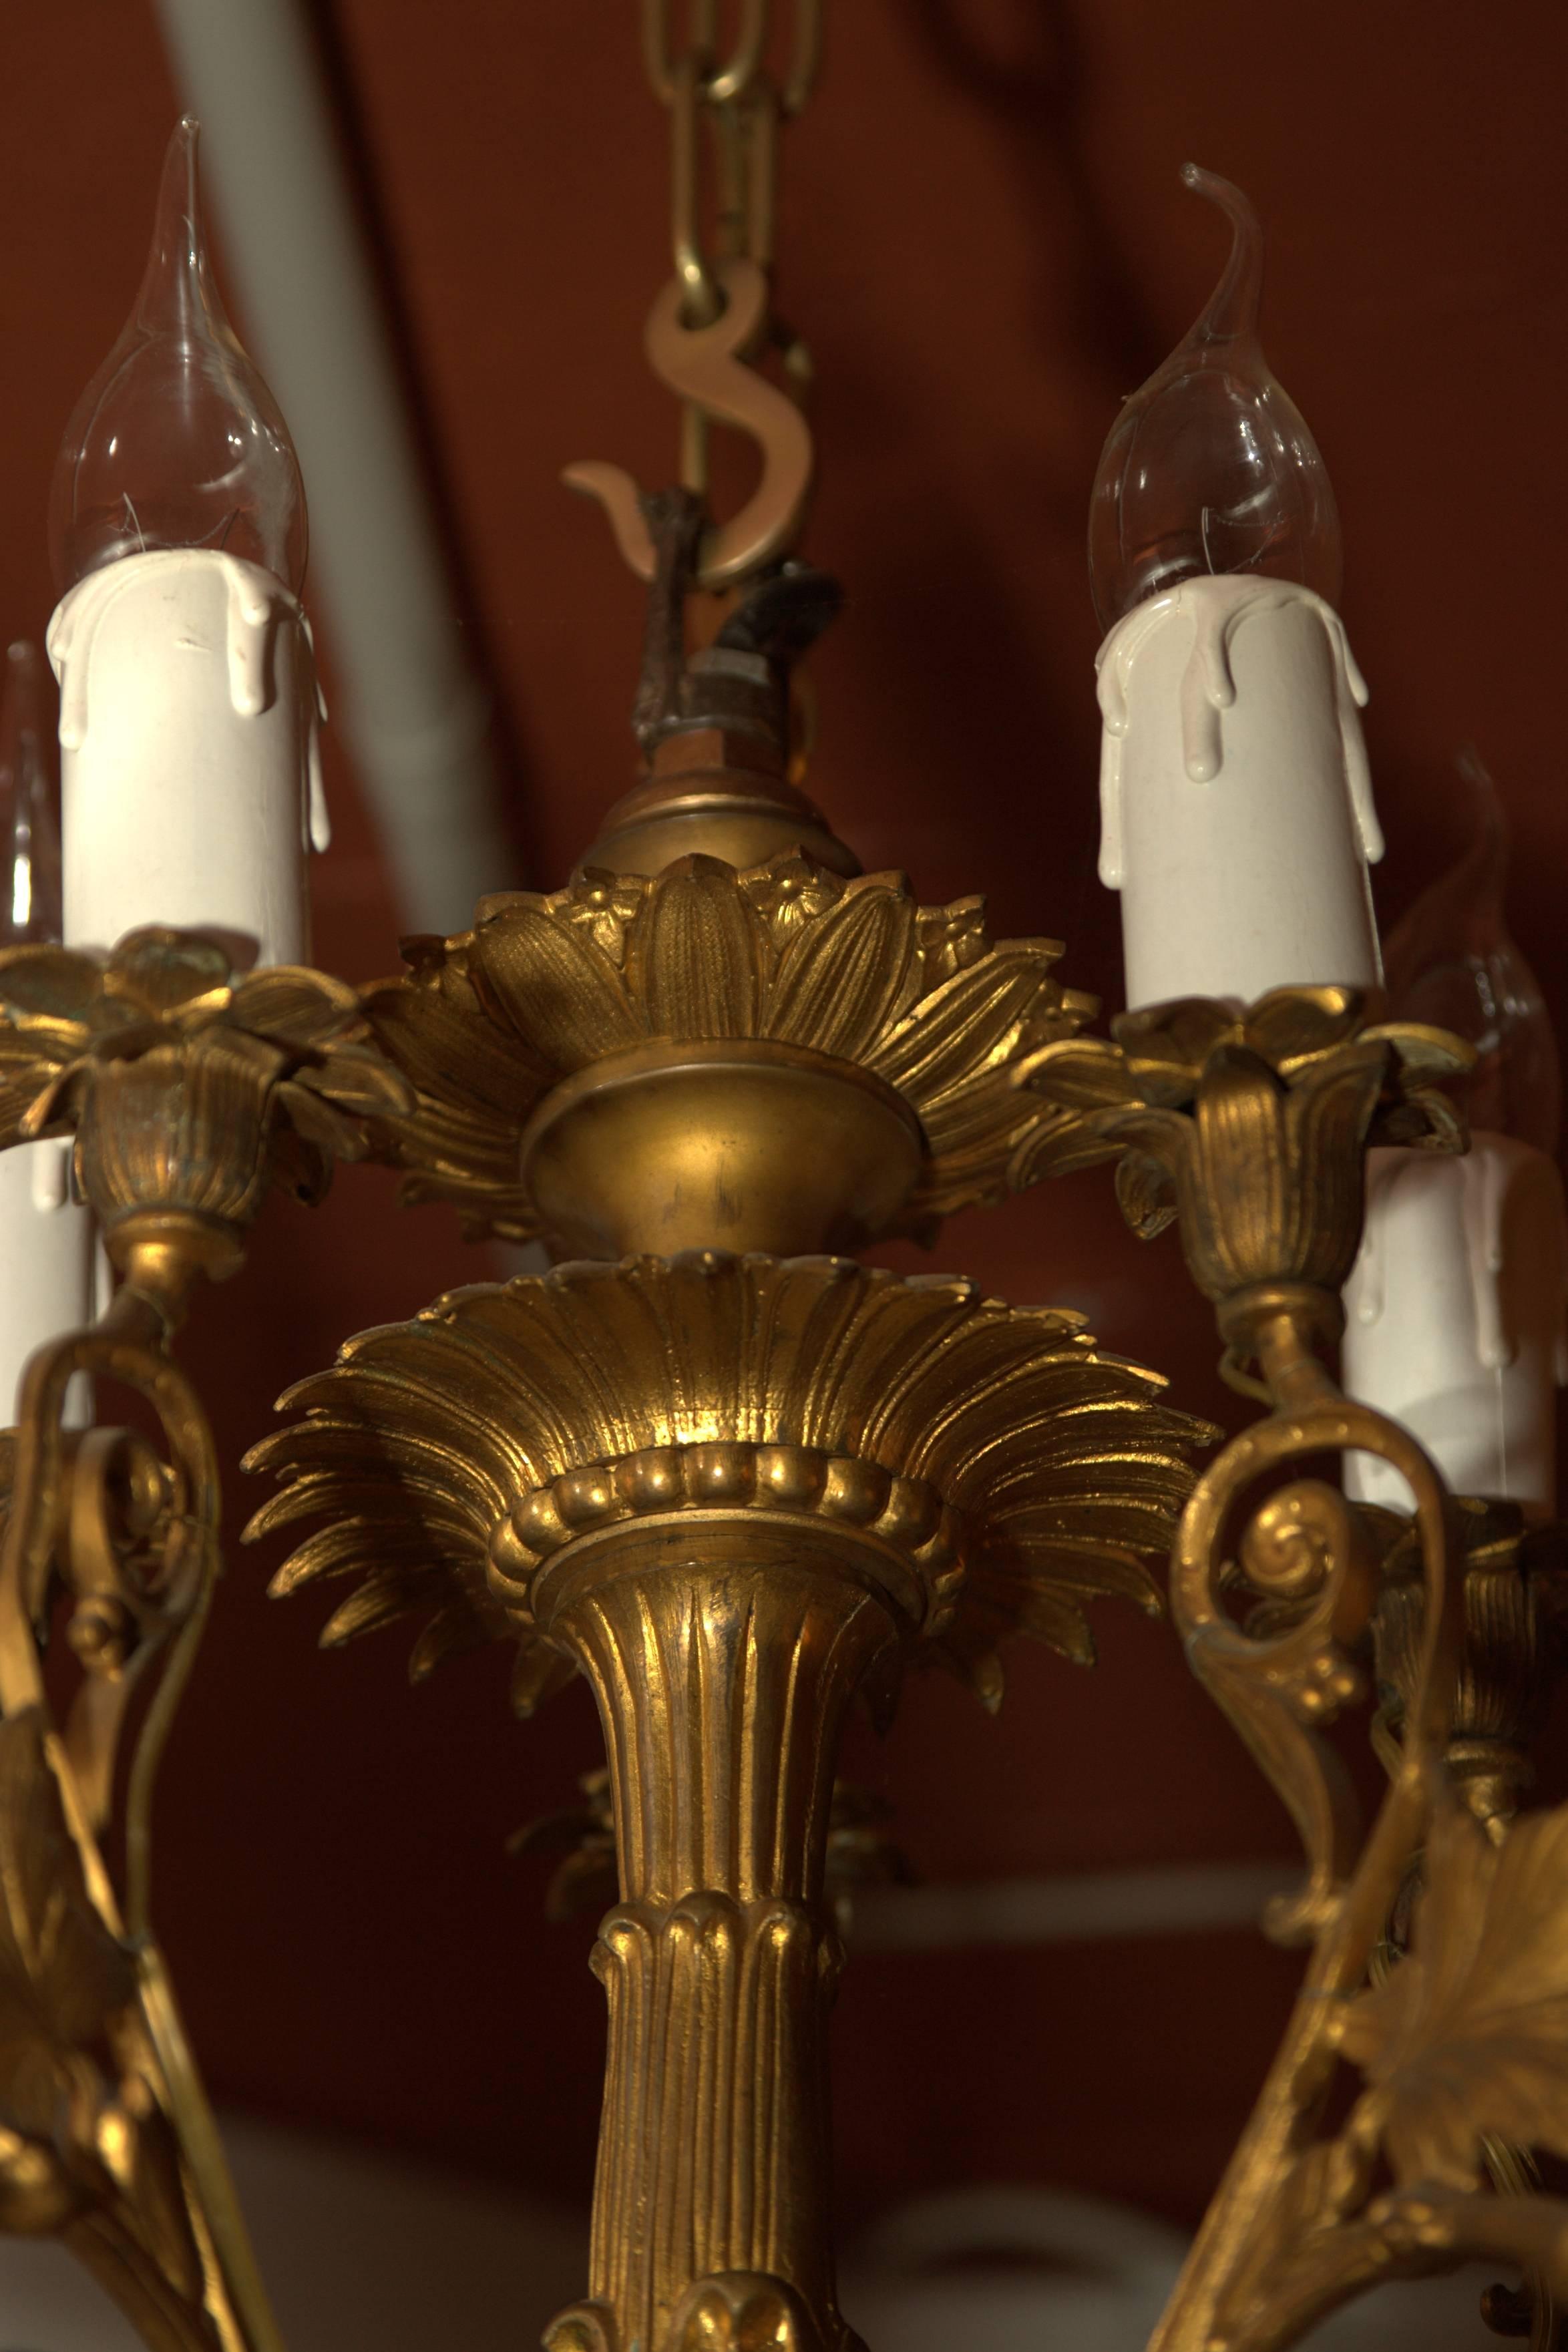 German 19th Century, Antique Classicist Ceiling Lamp Chandelier in the Empire Style